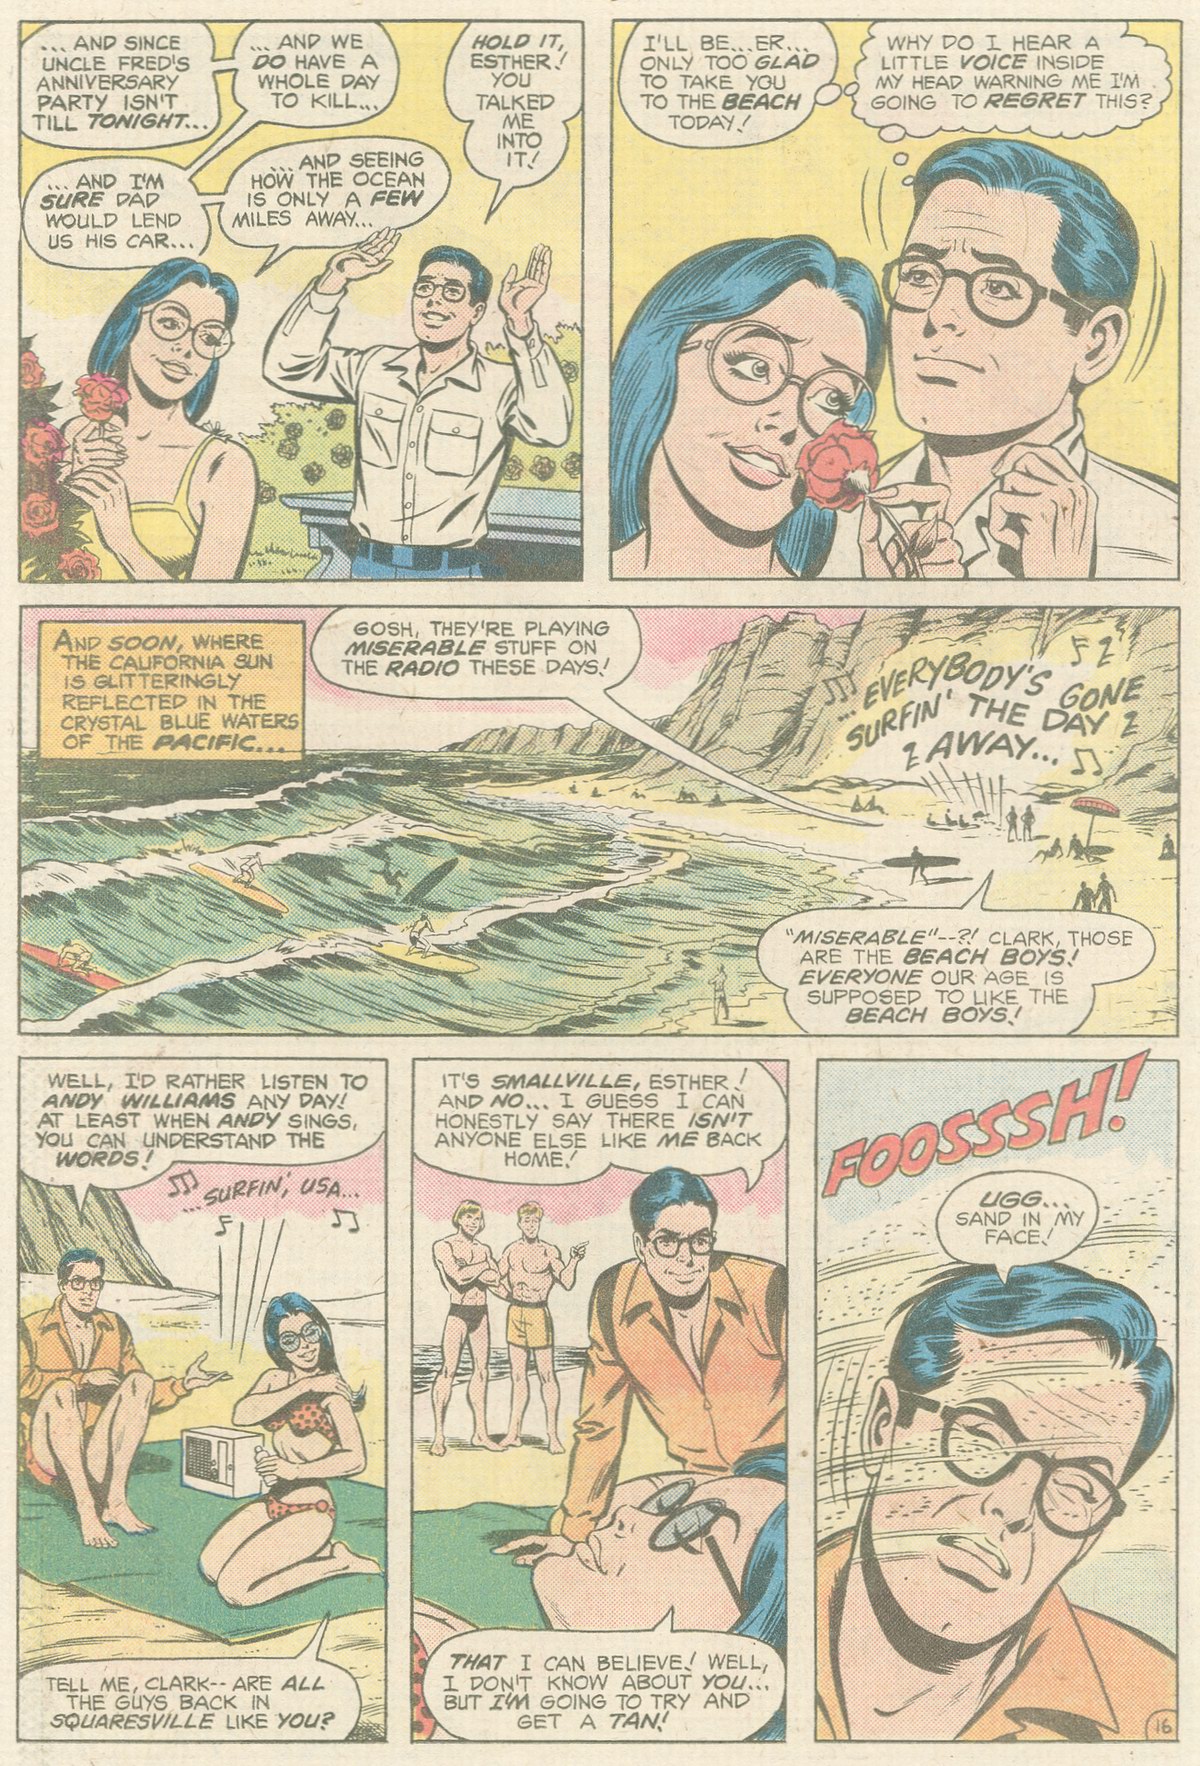 The New Adventures of Superboy 13 Page 16